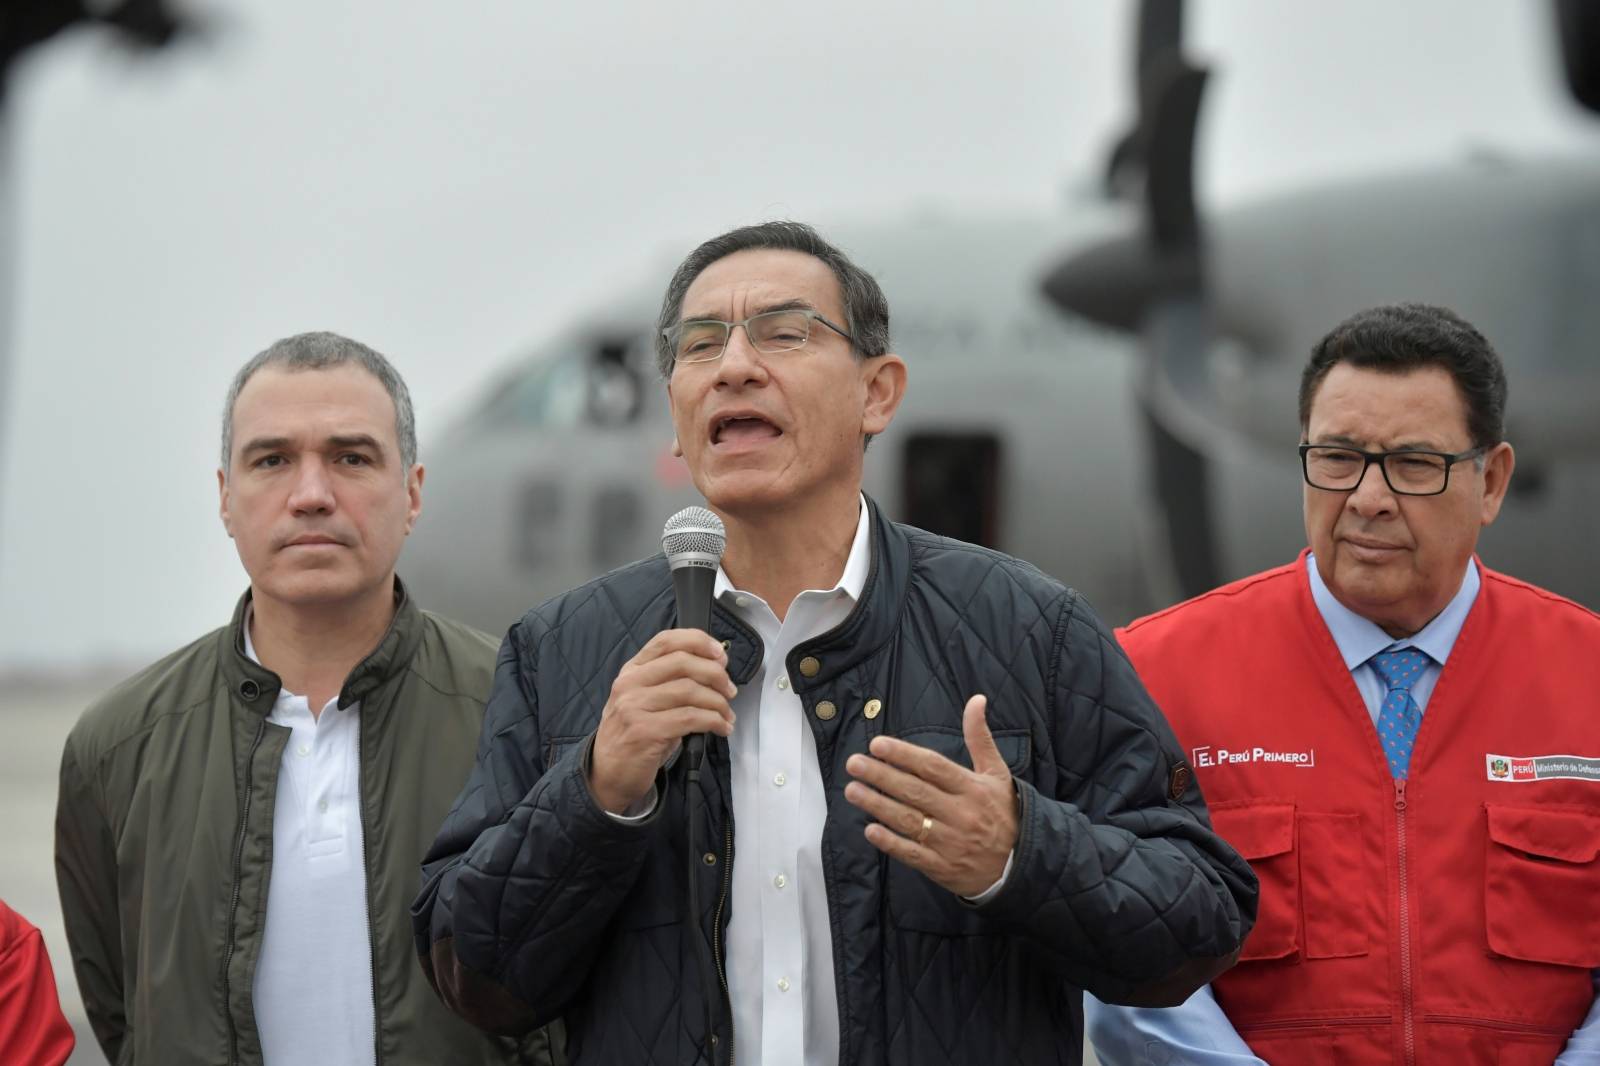 Peru's President Martin Vizcarra accompanied by members of his cabinet speaks to the media before leaving for the area affected by earthquake, at the Jorge Chavez airport in Lima